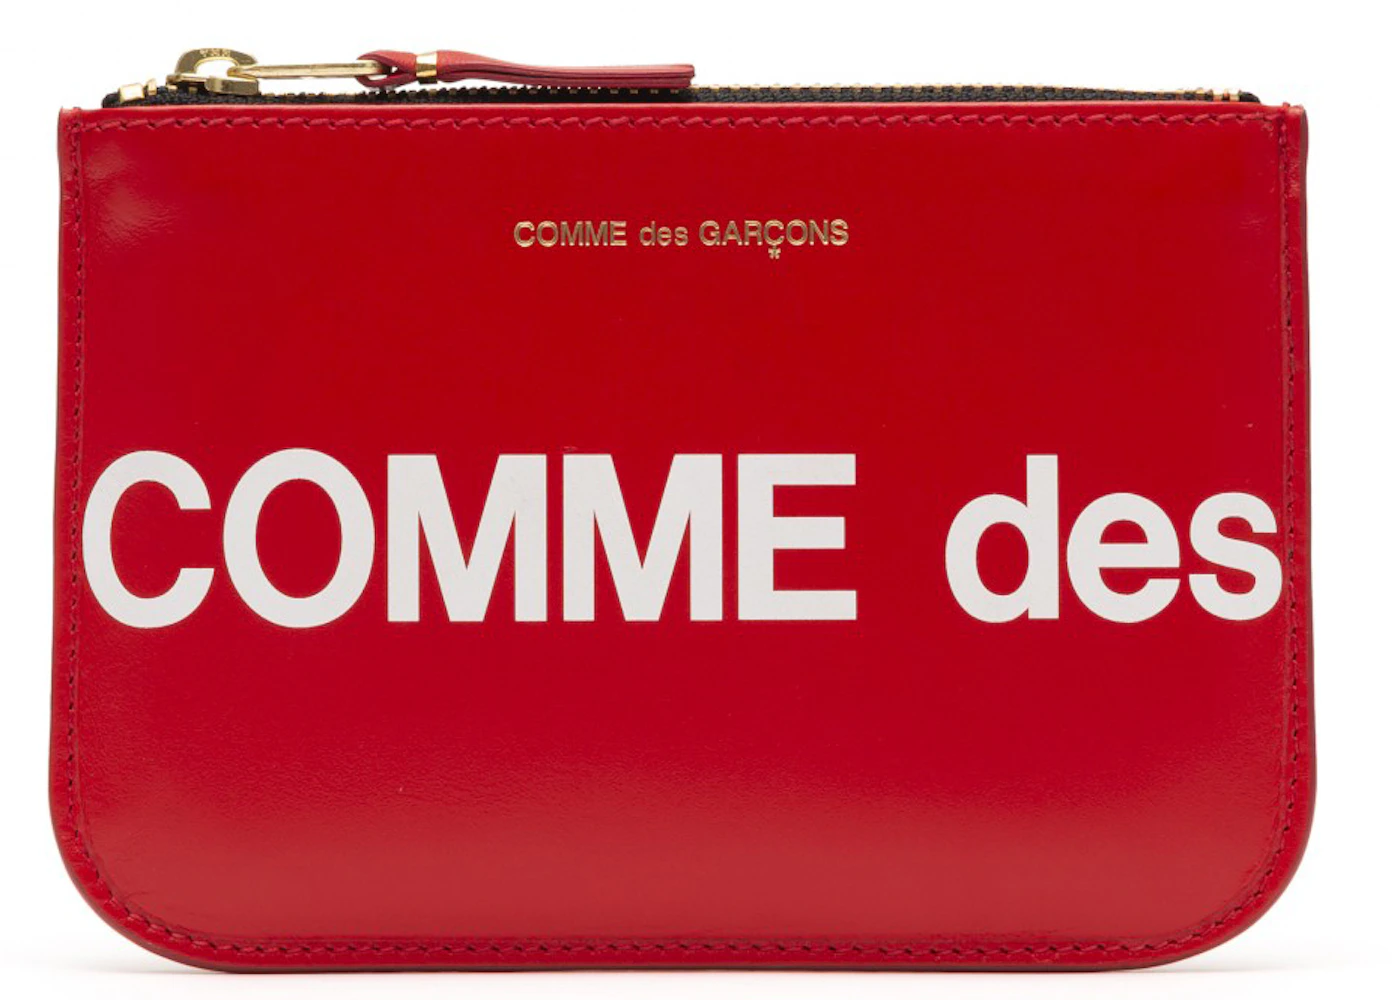 Comme des Garcons SA8100HL Huge Logo Wallet Red in Leather with Gold ...